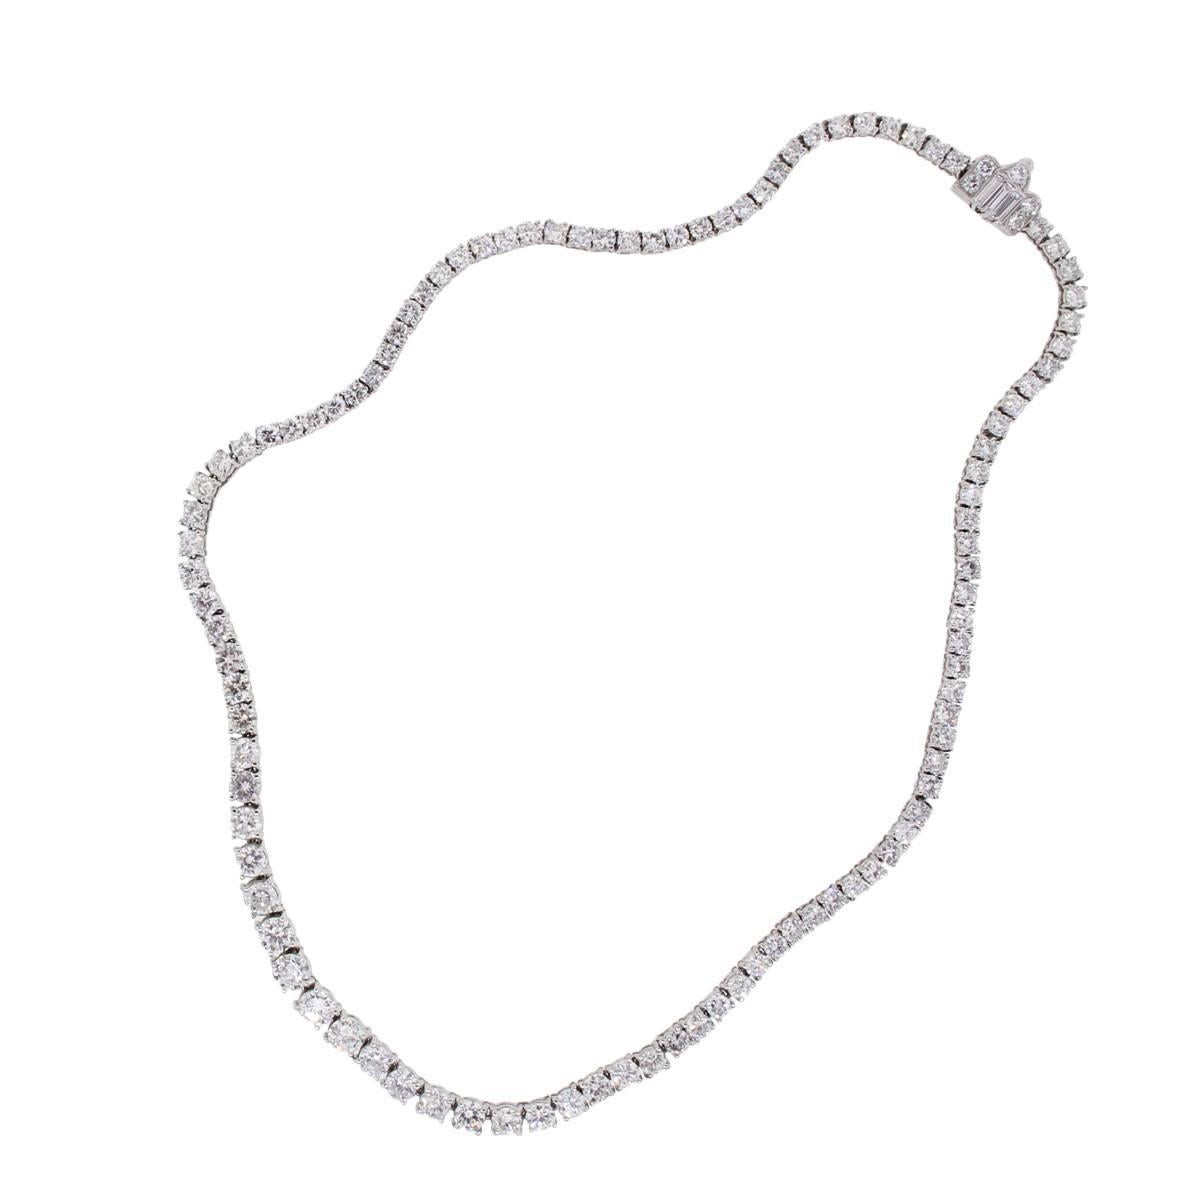 Material: Platinum
Diamond Details: Approximately 10ctw of round brilliant diamonds and baguette shape diamonds. Diamonds are H/I in Color and SI in Clarity
Total Weight: 28.6g (18.3dwt)
Necklace Length: 15.25